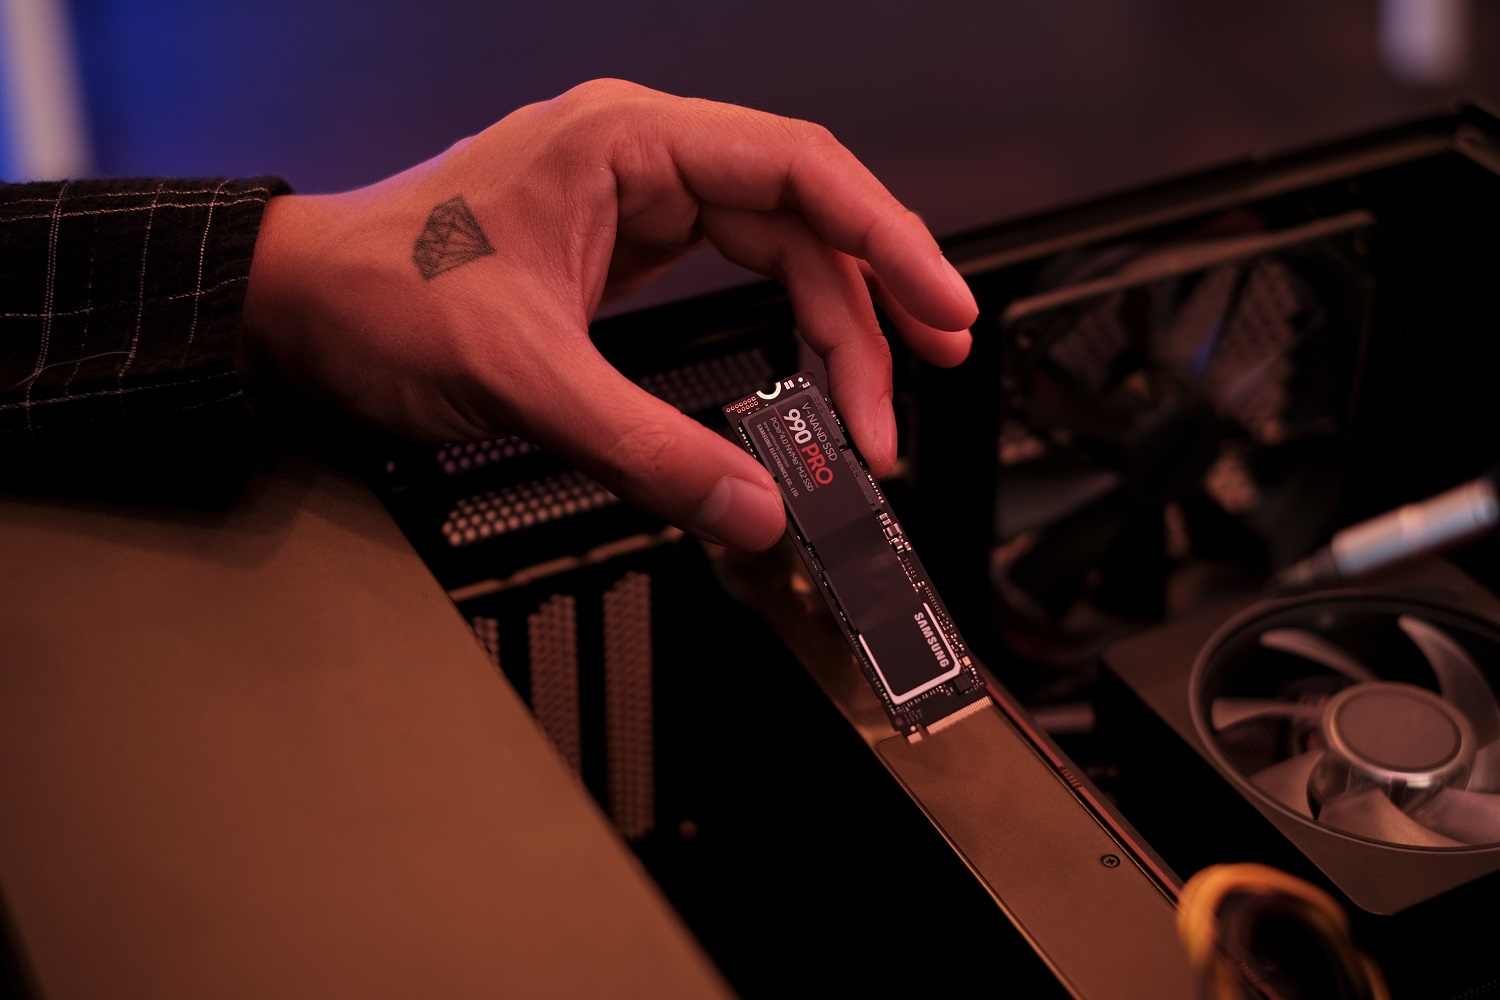 The Samsung 990 Pro SSD being installed in a PC